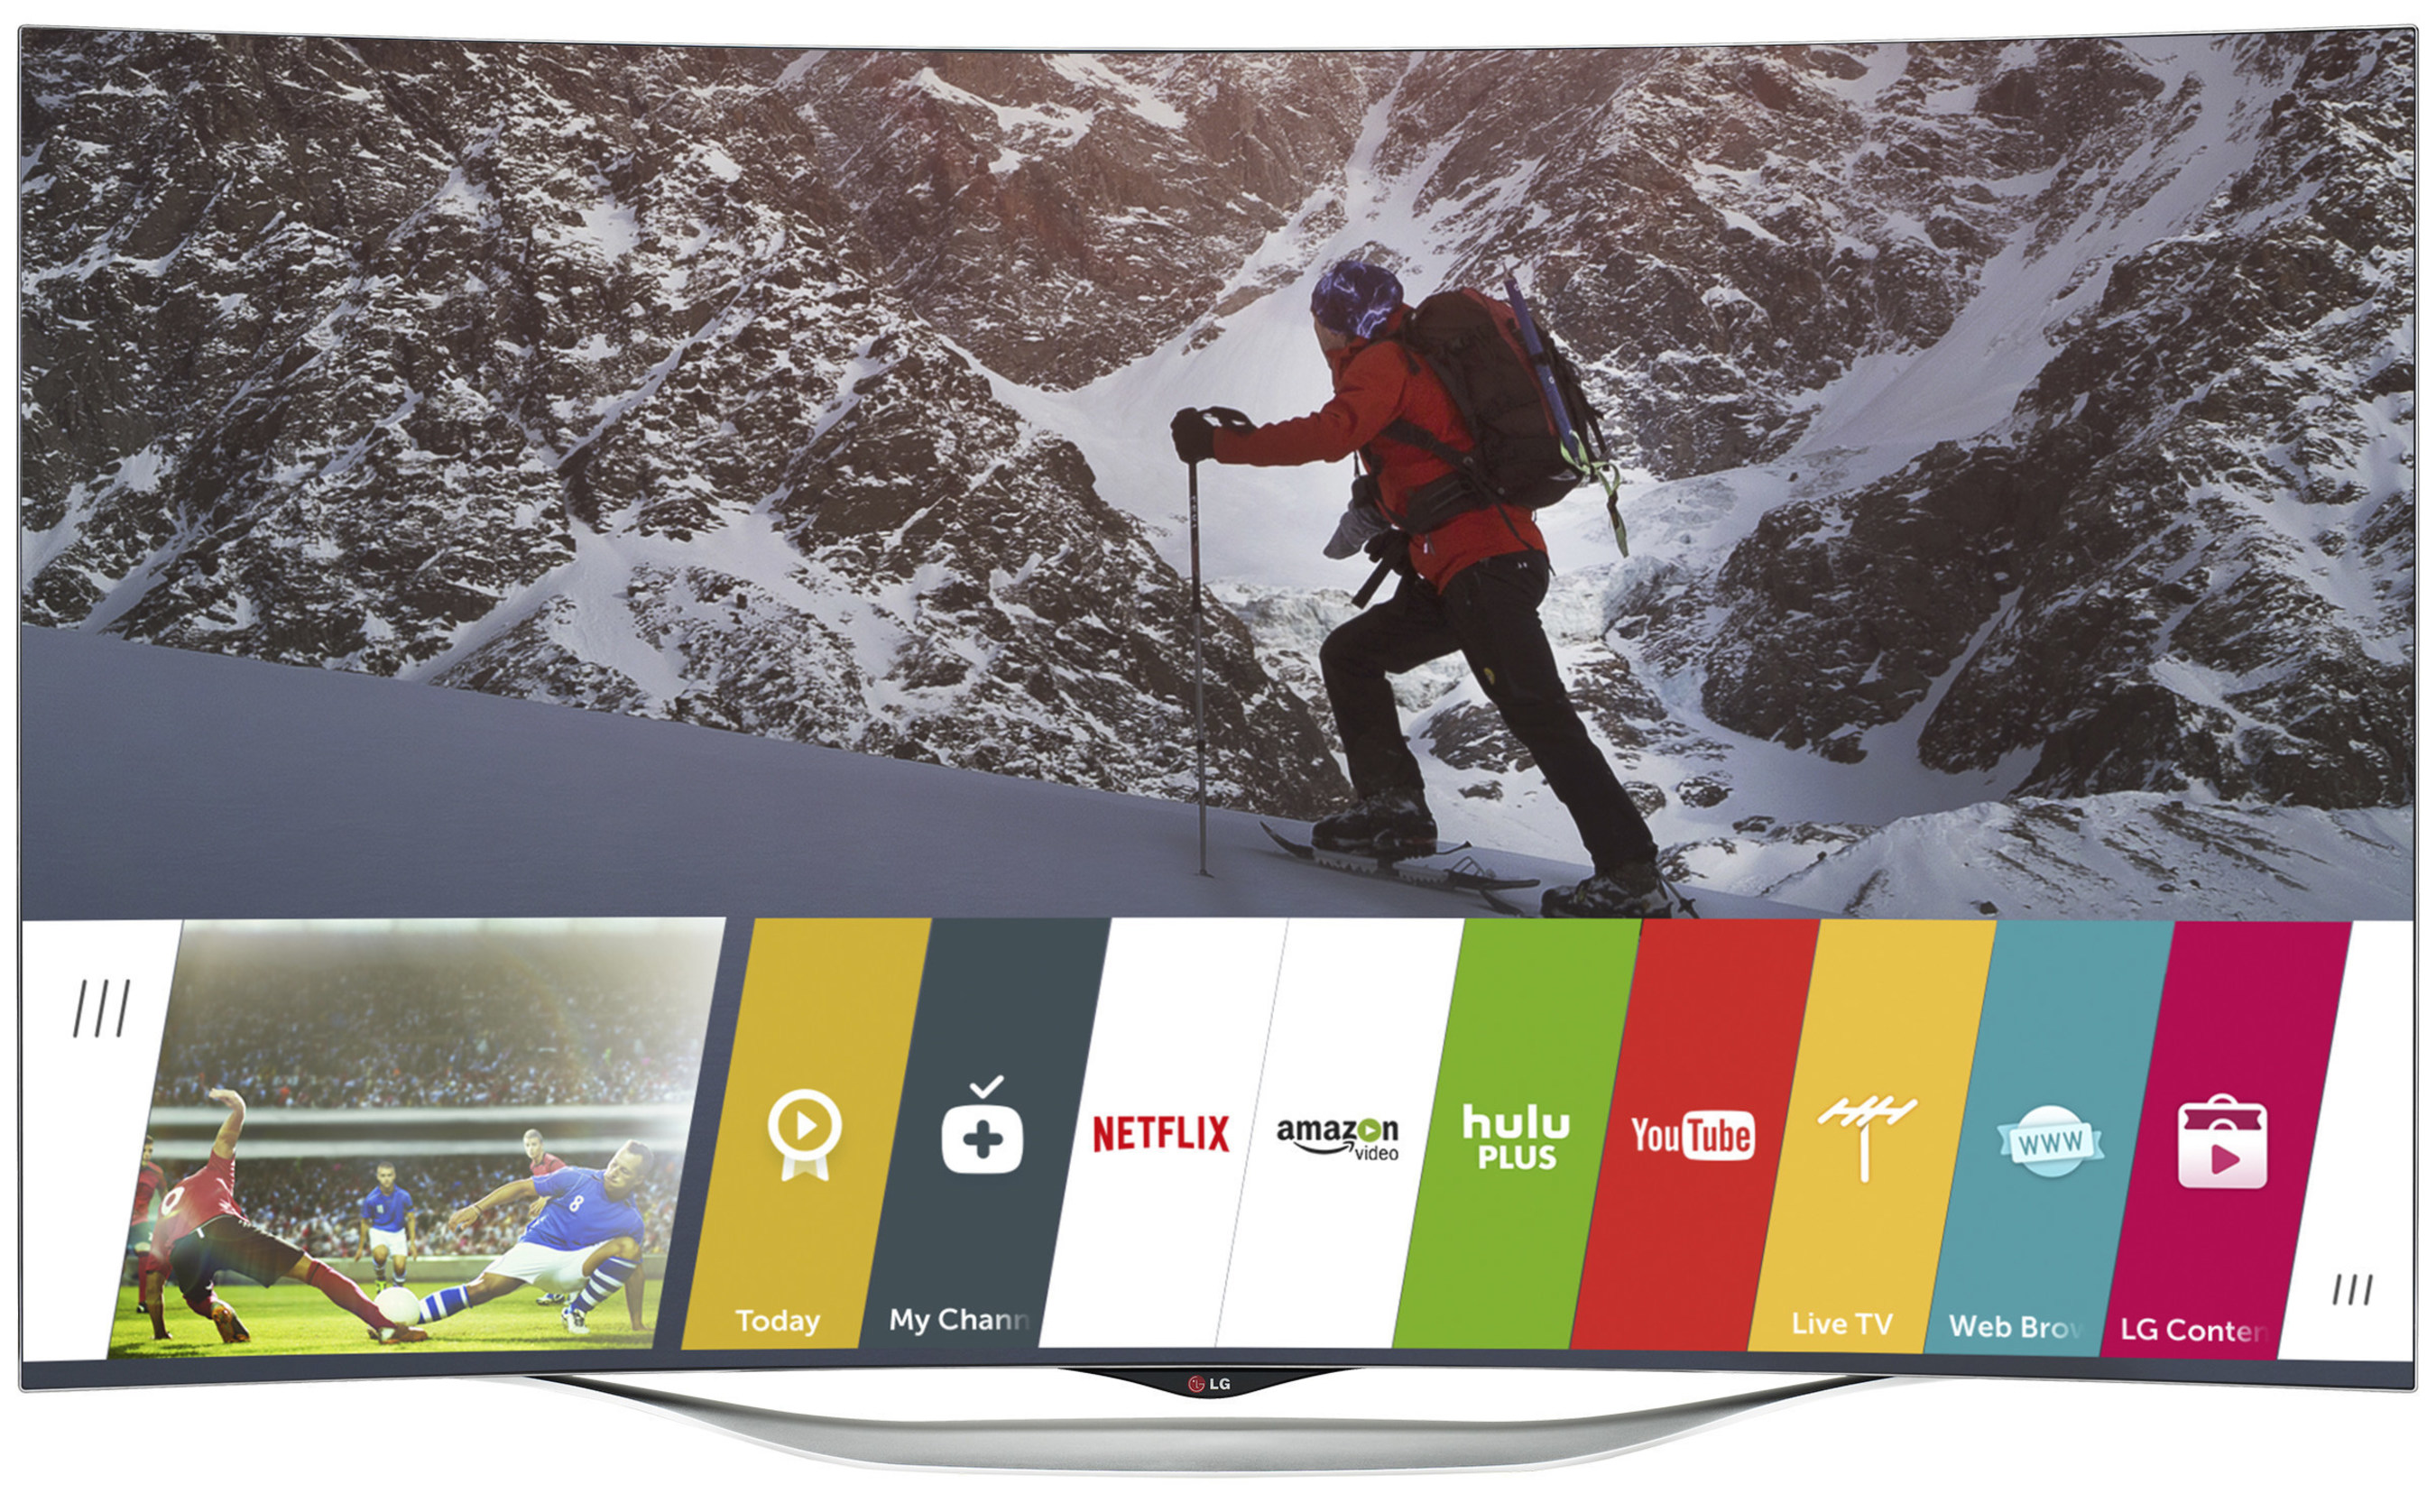 LG Electronics USA today announced a no-cost firmware update for its webOS Smart TV platform on 2014 smart TV models, including the EC9300 (pictured). A free upgrade o this scale is unprecedented in the smart TV industry.